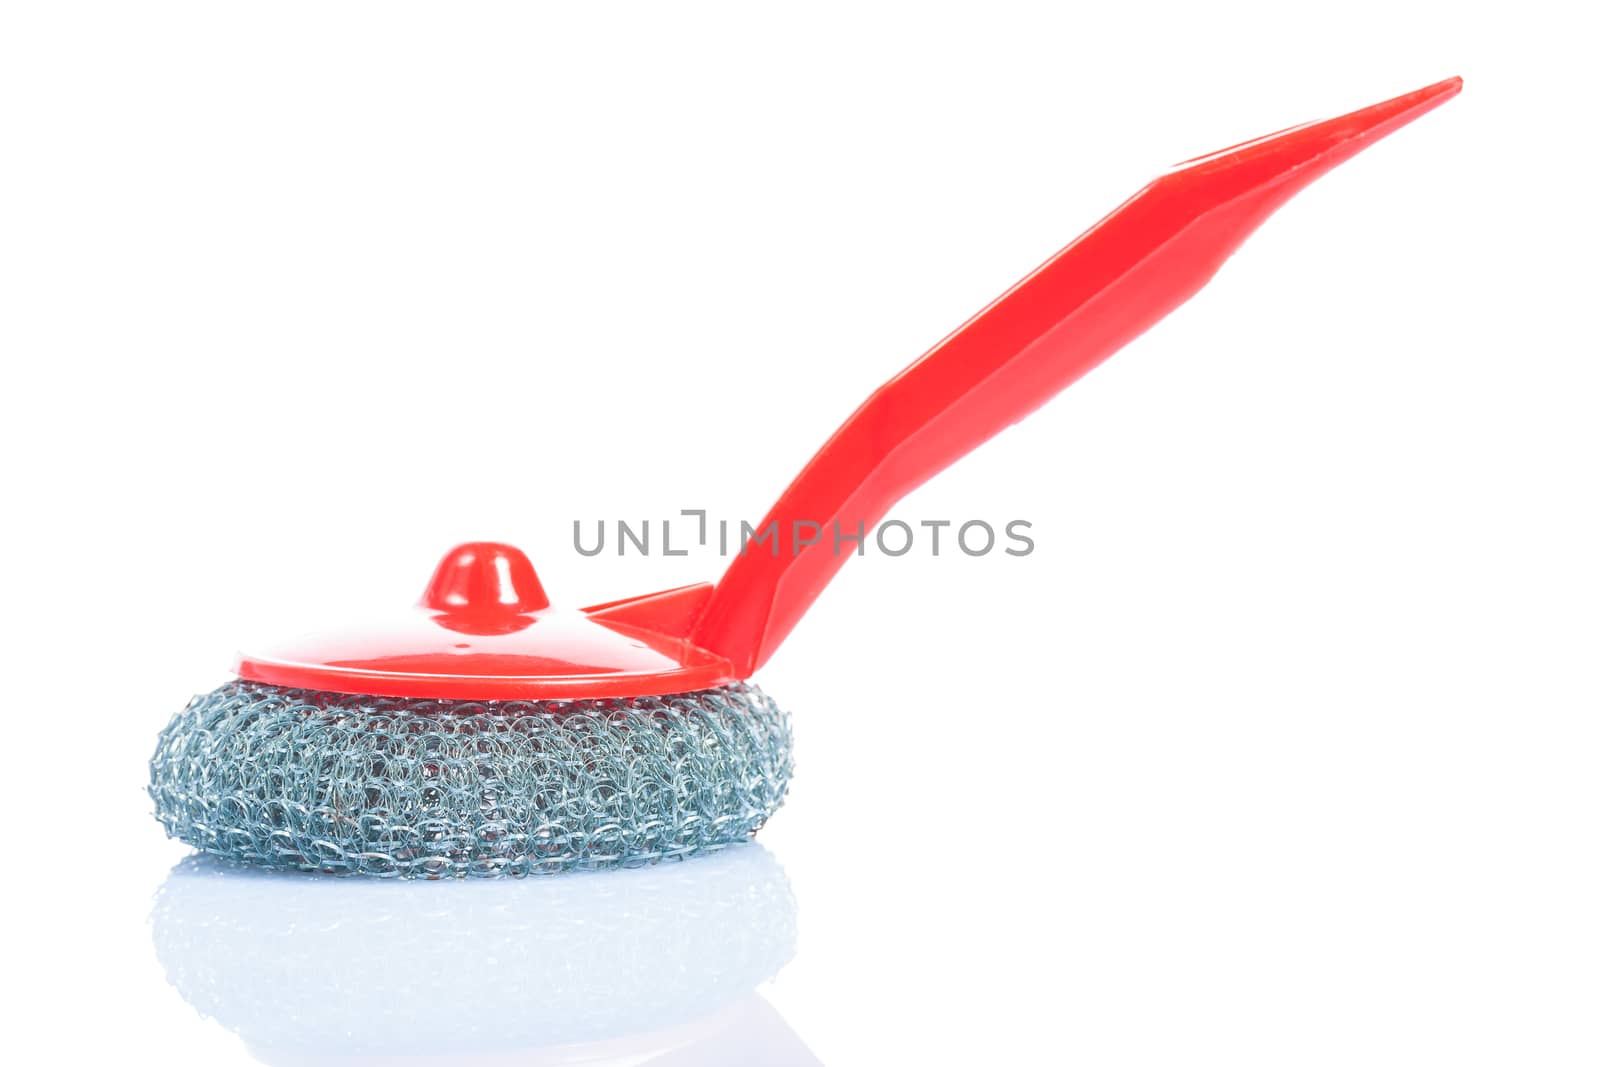 scrub brush with red handle isolated